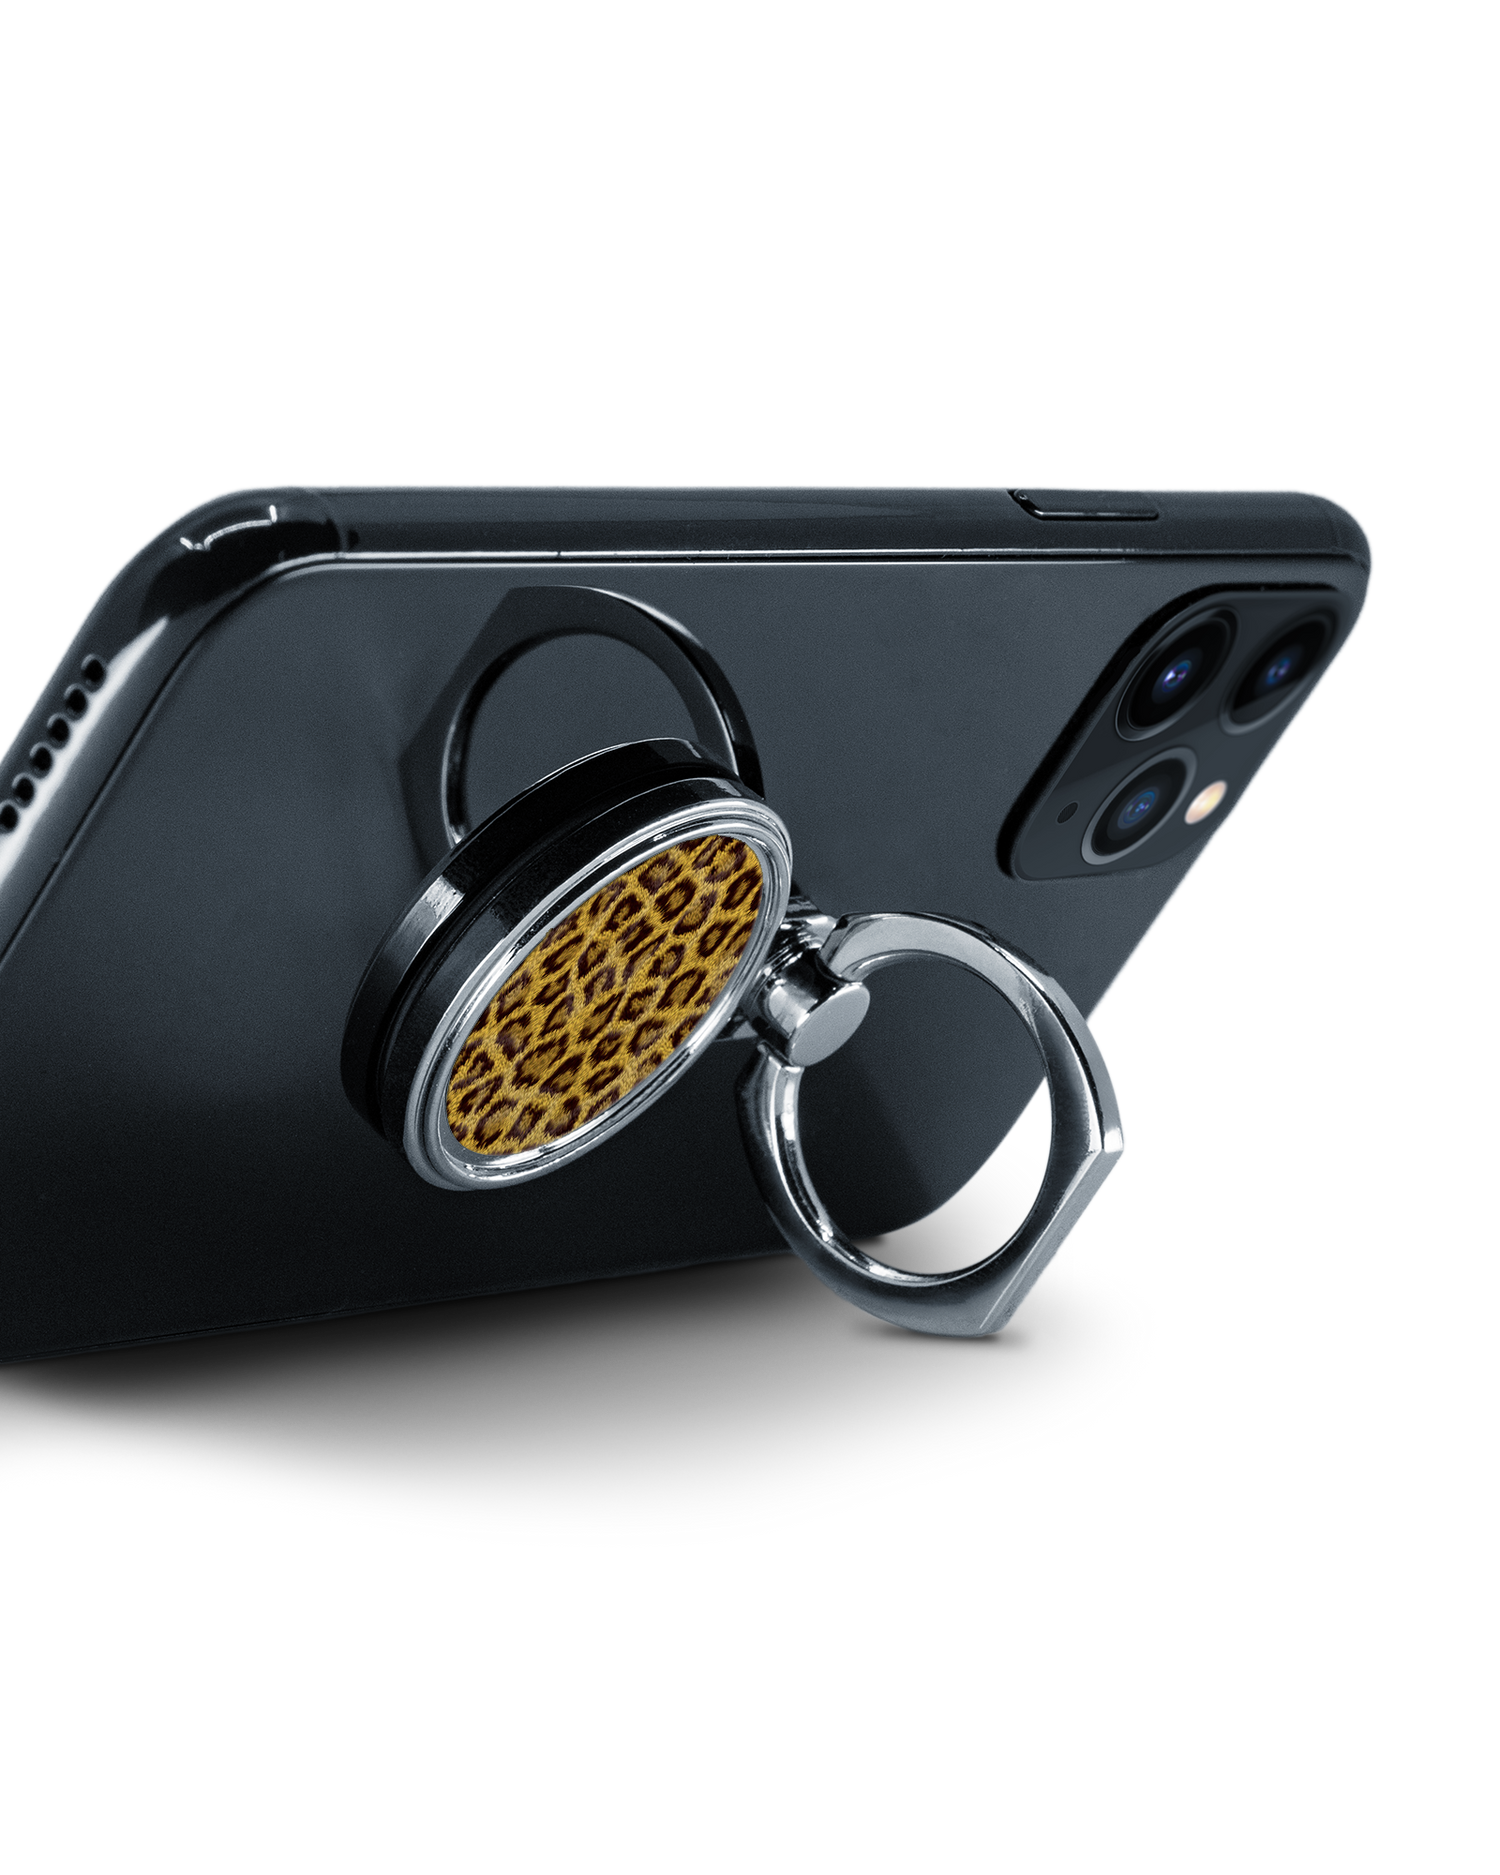 Leopard Skin Ring Holder attached to a smartphone